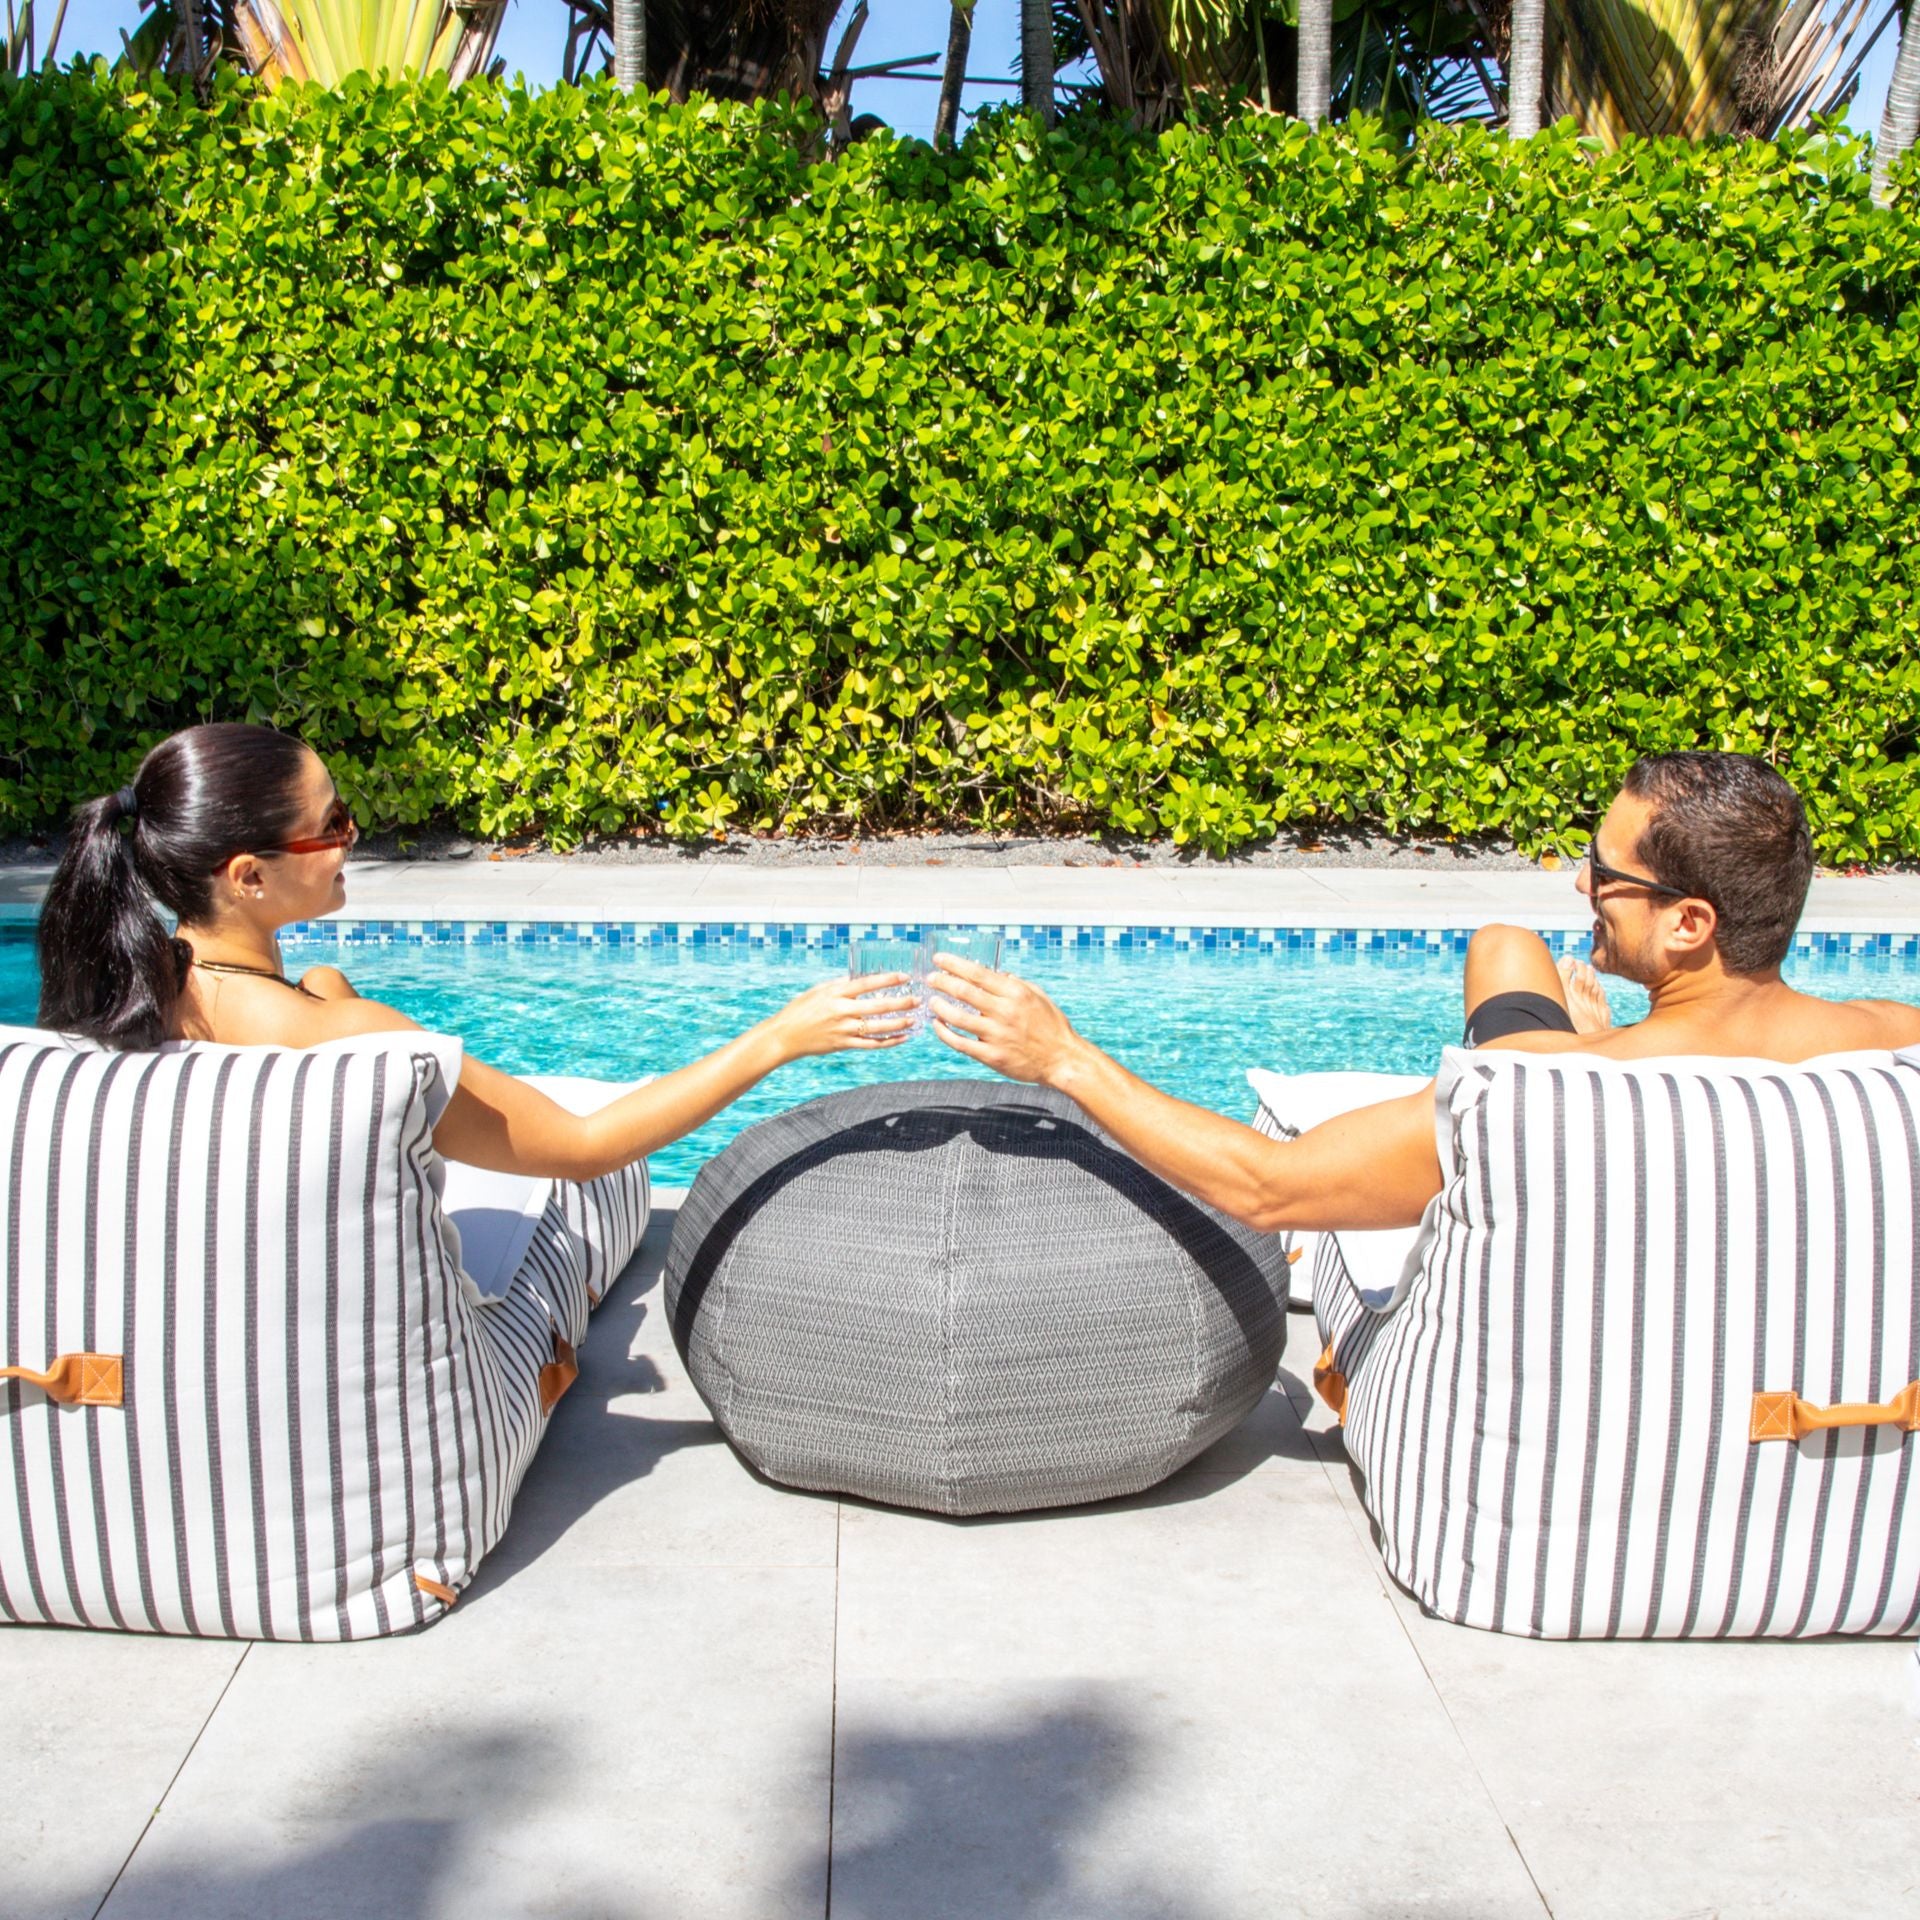 Lux Pouf pool float center table or seat 